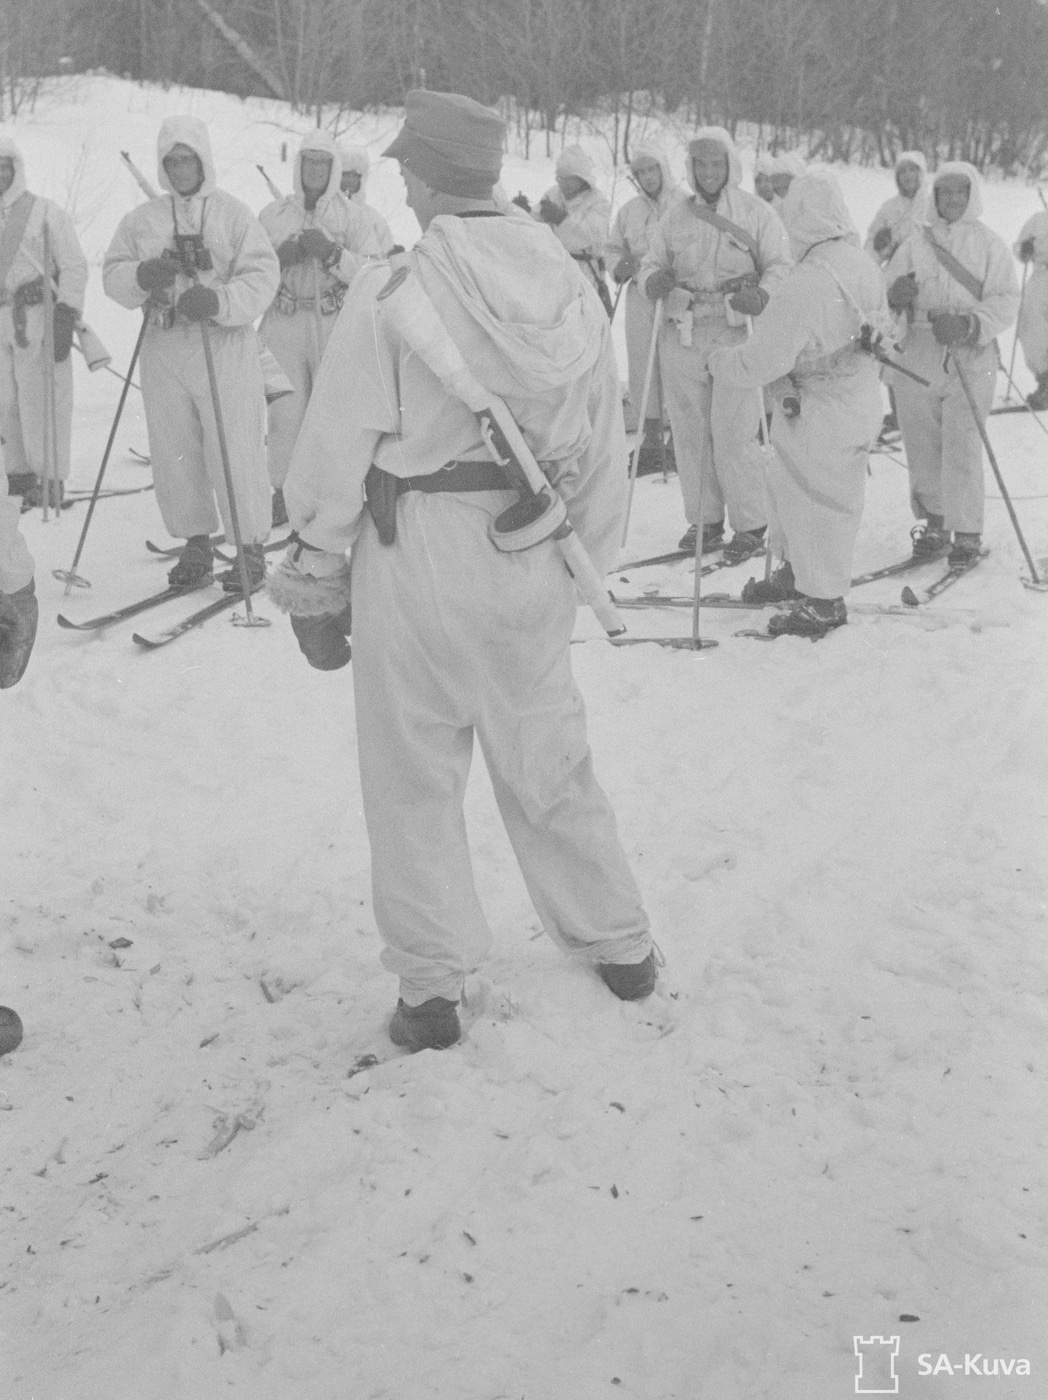 finnish ski patrol soldiers kp -31 smg winter white camo clothing snow